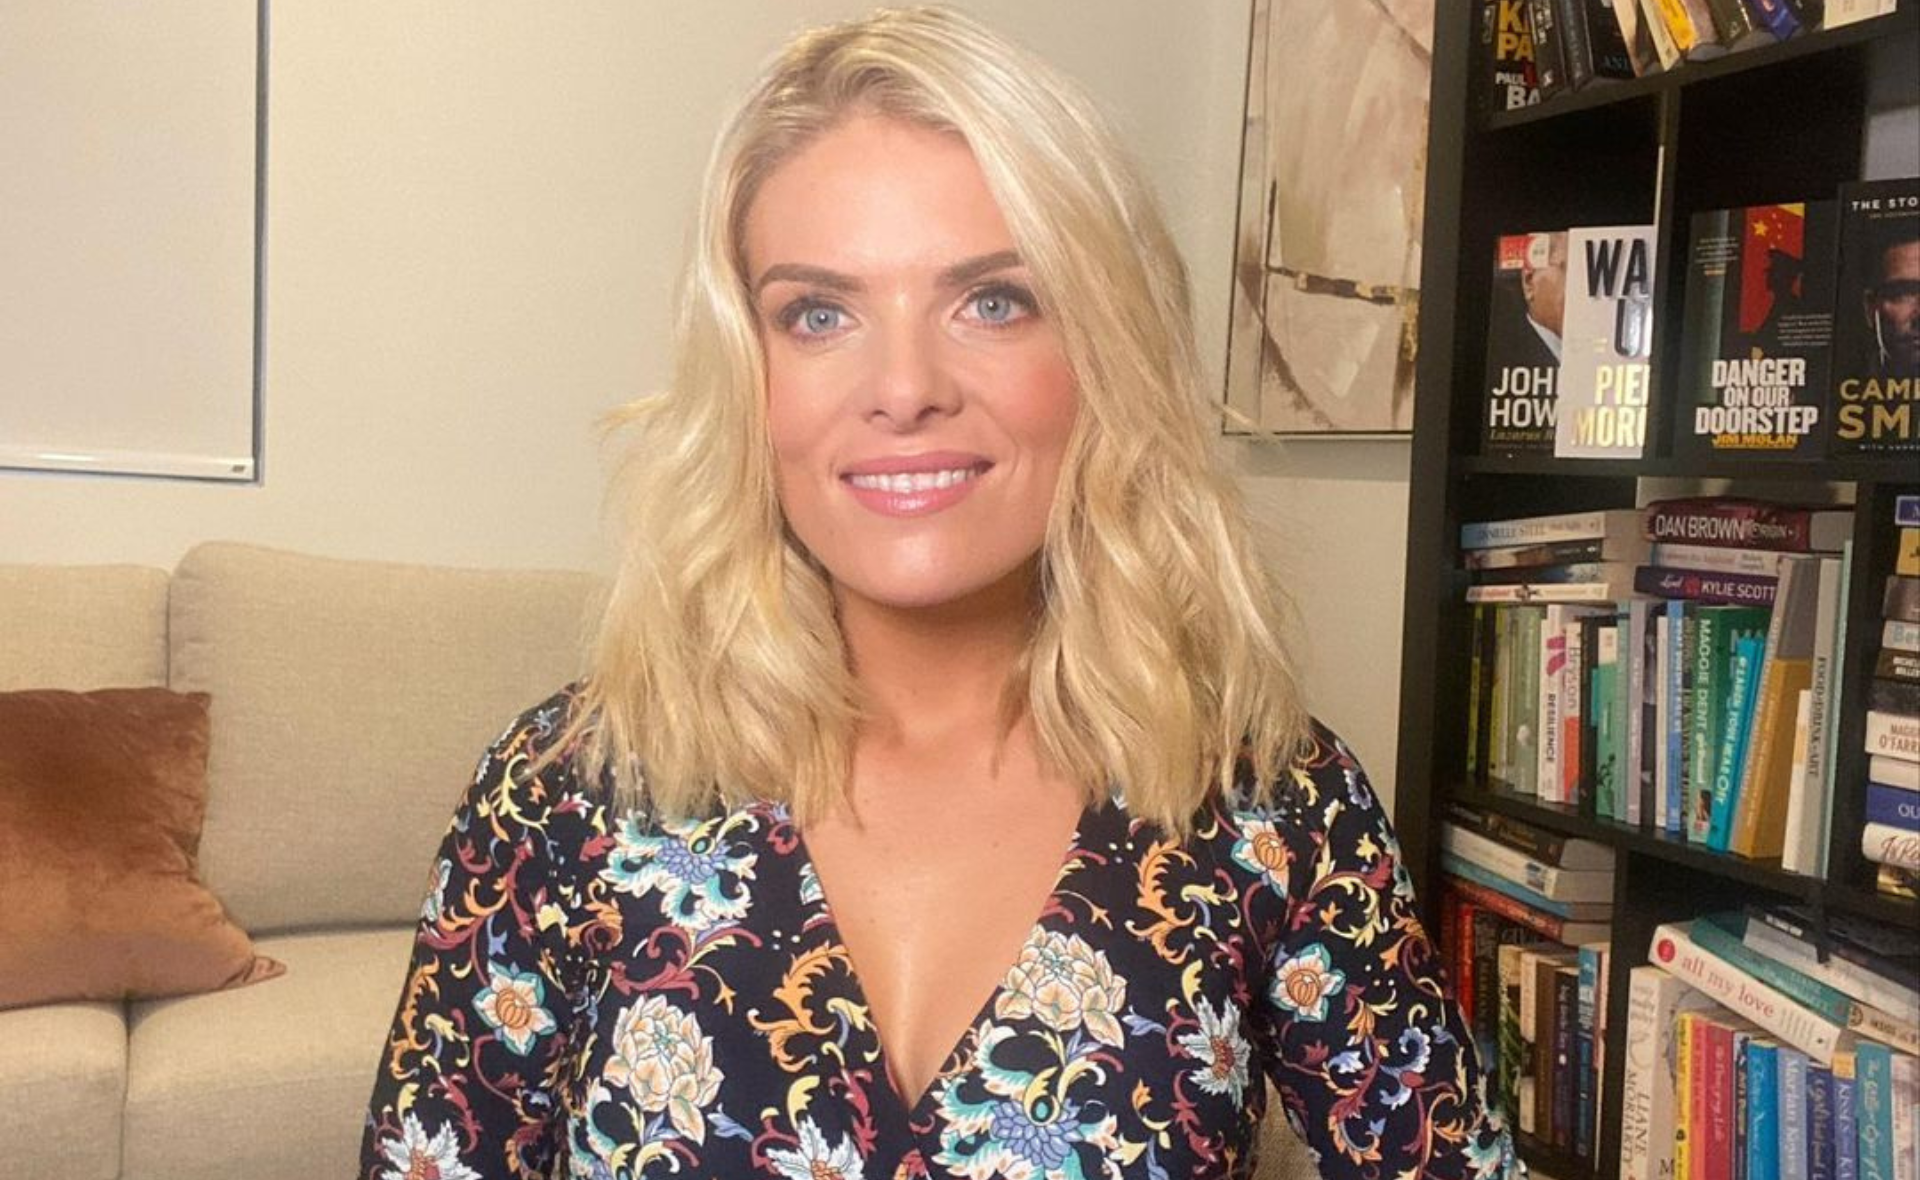 Erin Molan finally unveils the mystery man from Hollywood that “slid into her DM’s”